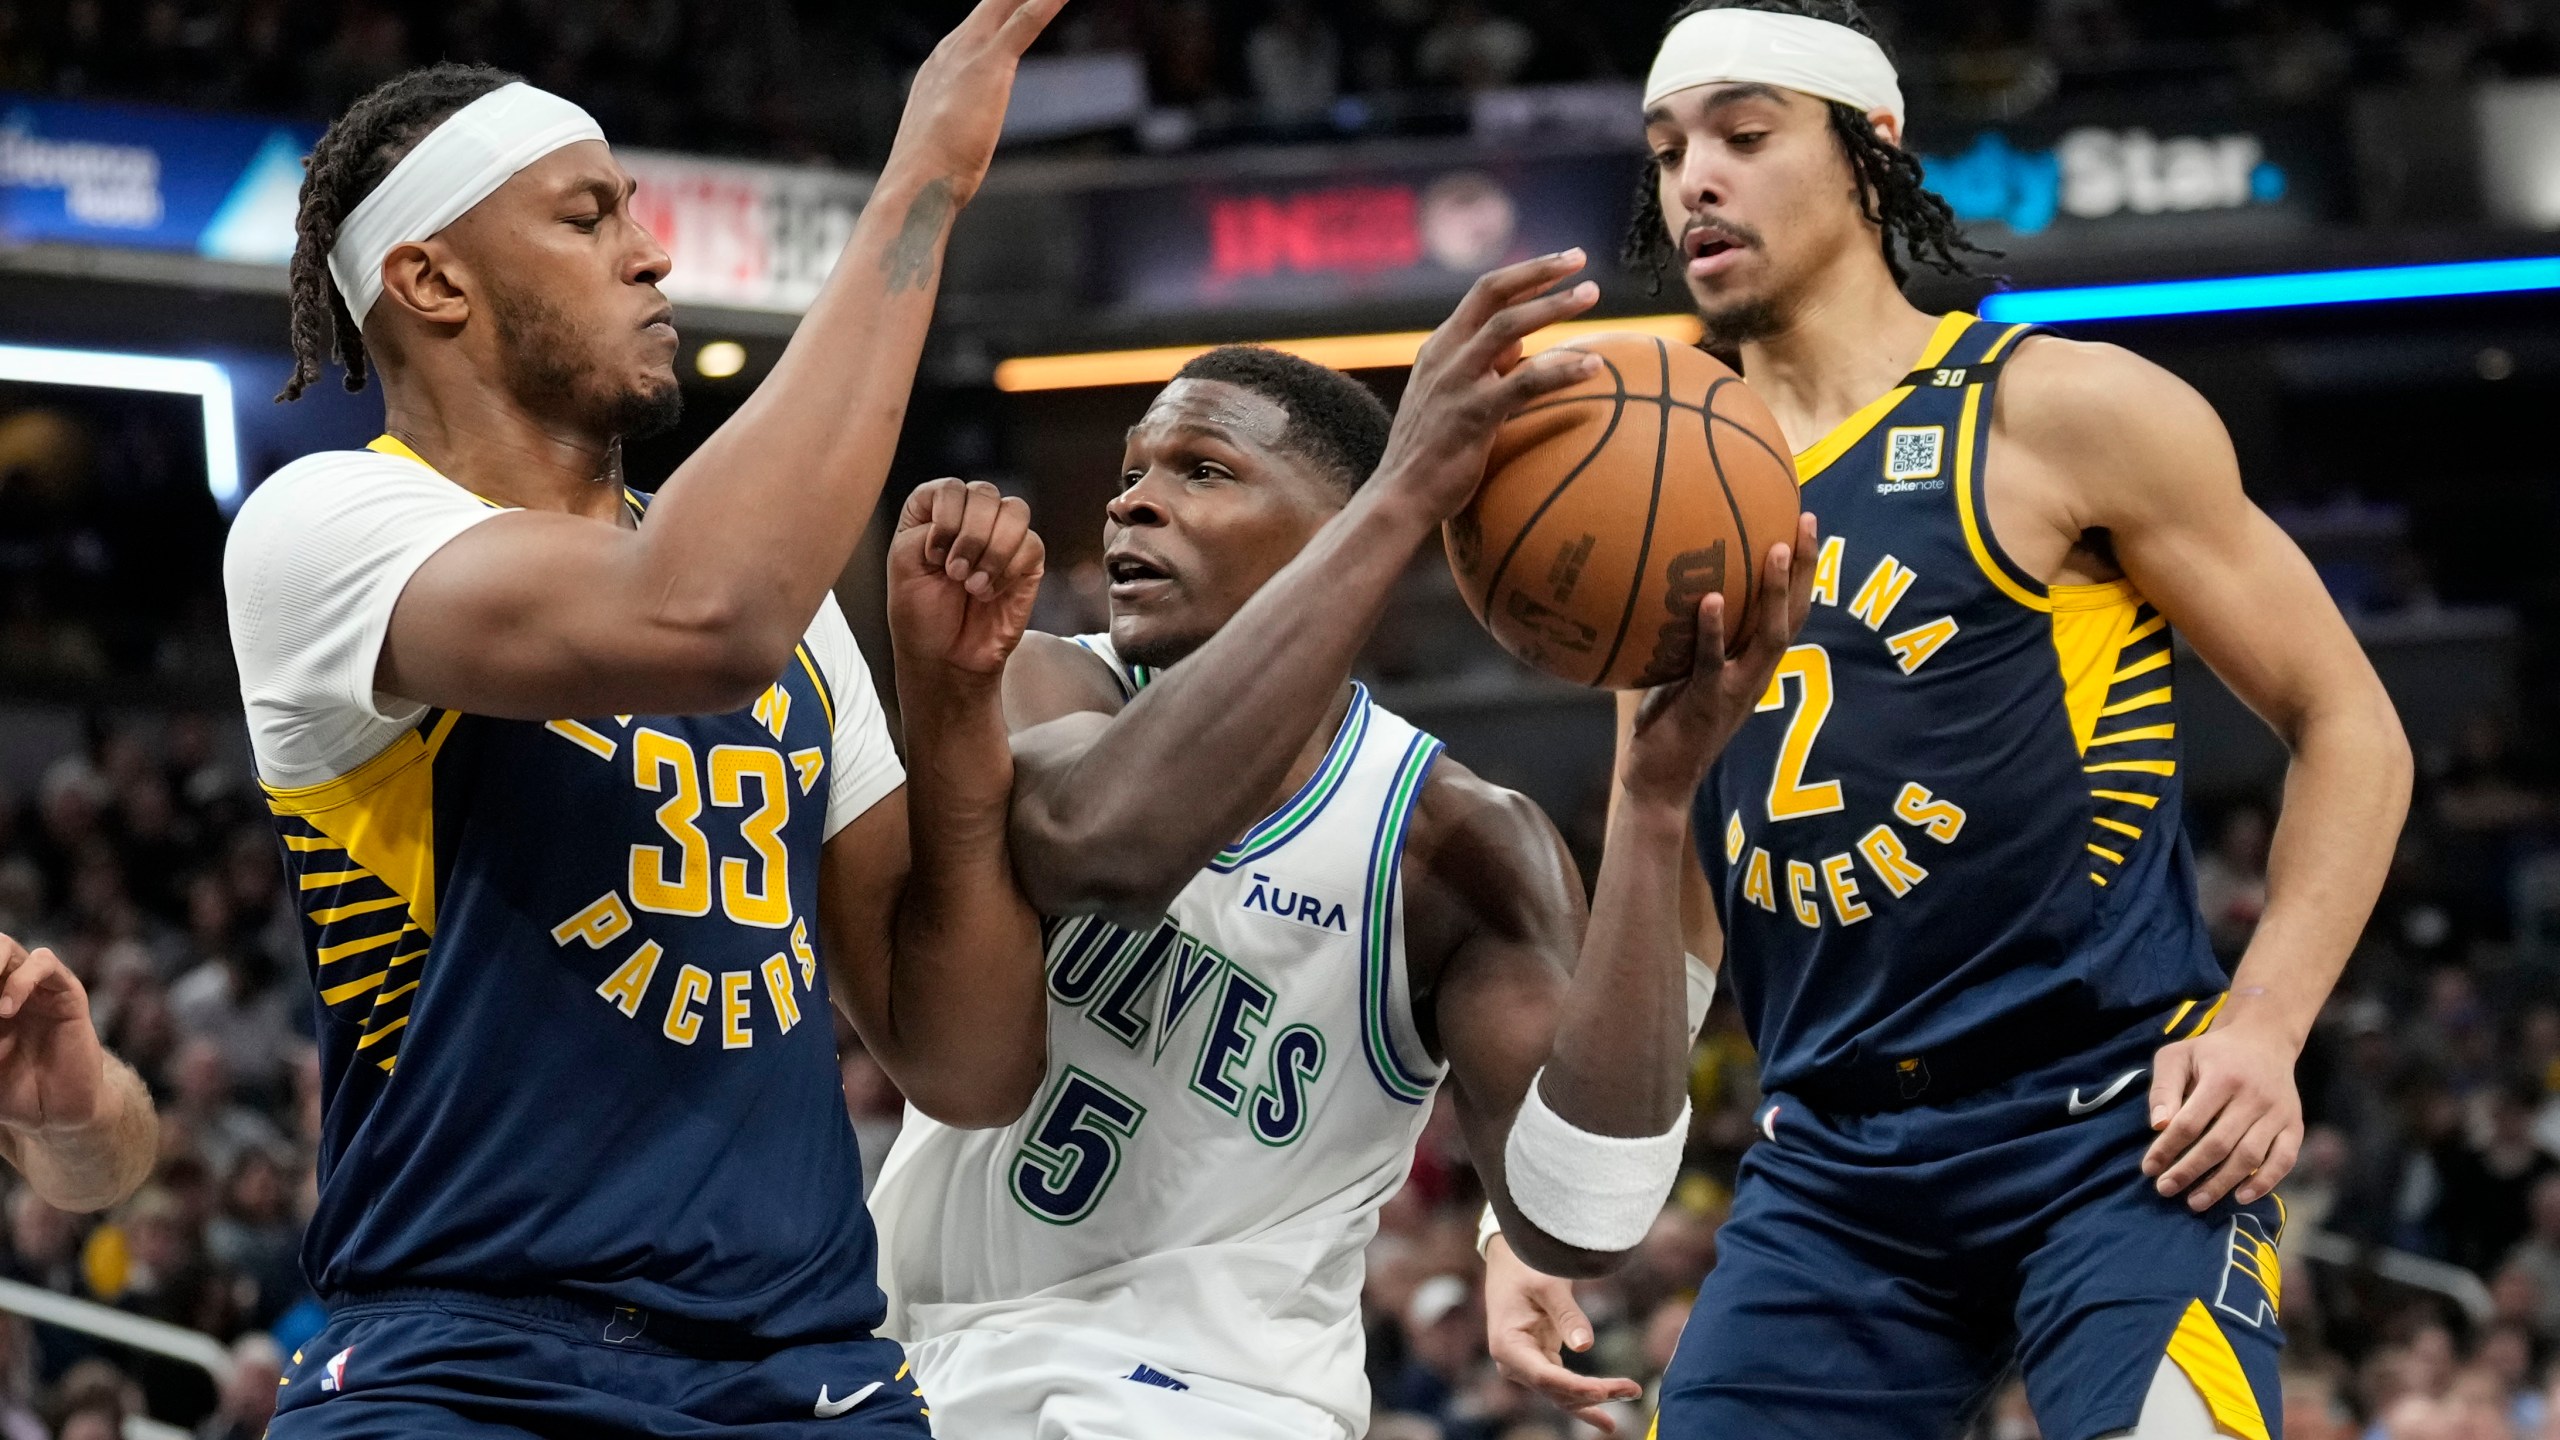 Minnesota Timberwolves guard Anthony Edwards (5) works between Indiana Pacers defenders Myles Turner, left, and Andrew Nembhard during the second half of an NBA basketball game Thursday, March 7, 2024, in Indianapolis. The Timberwolves won 113-111. (AP Photo/AJ Mast)